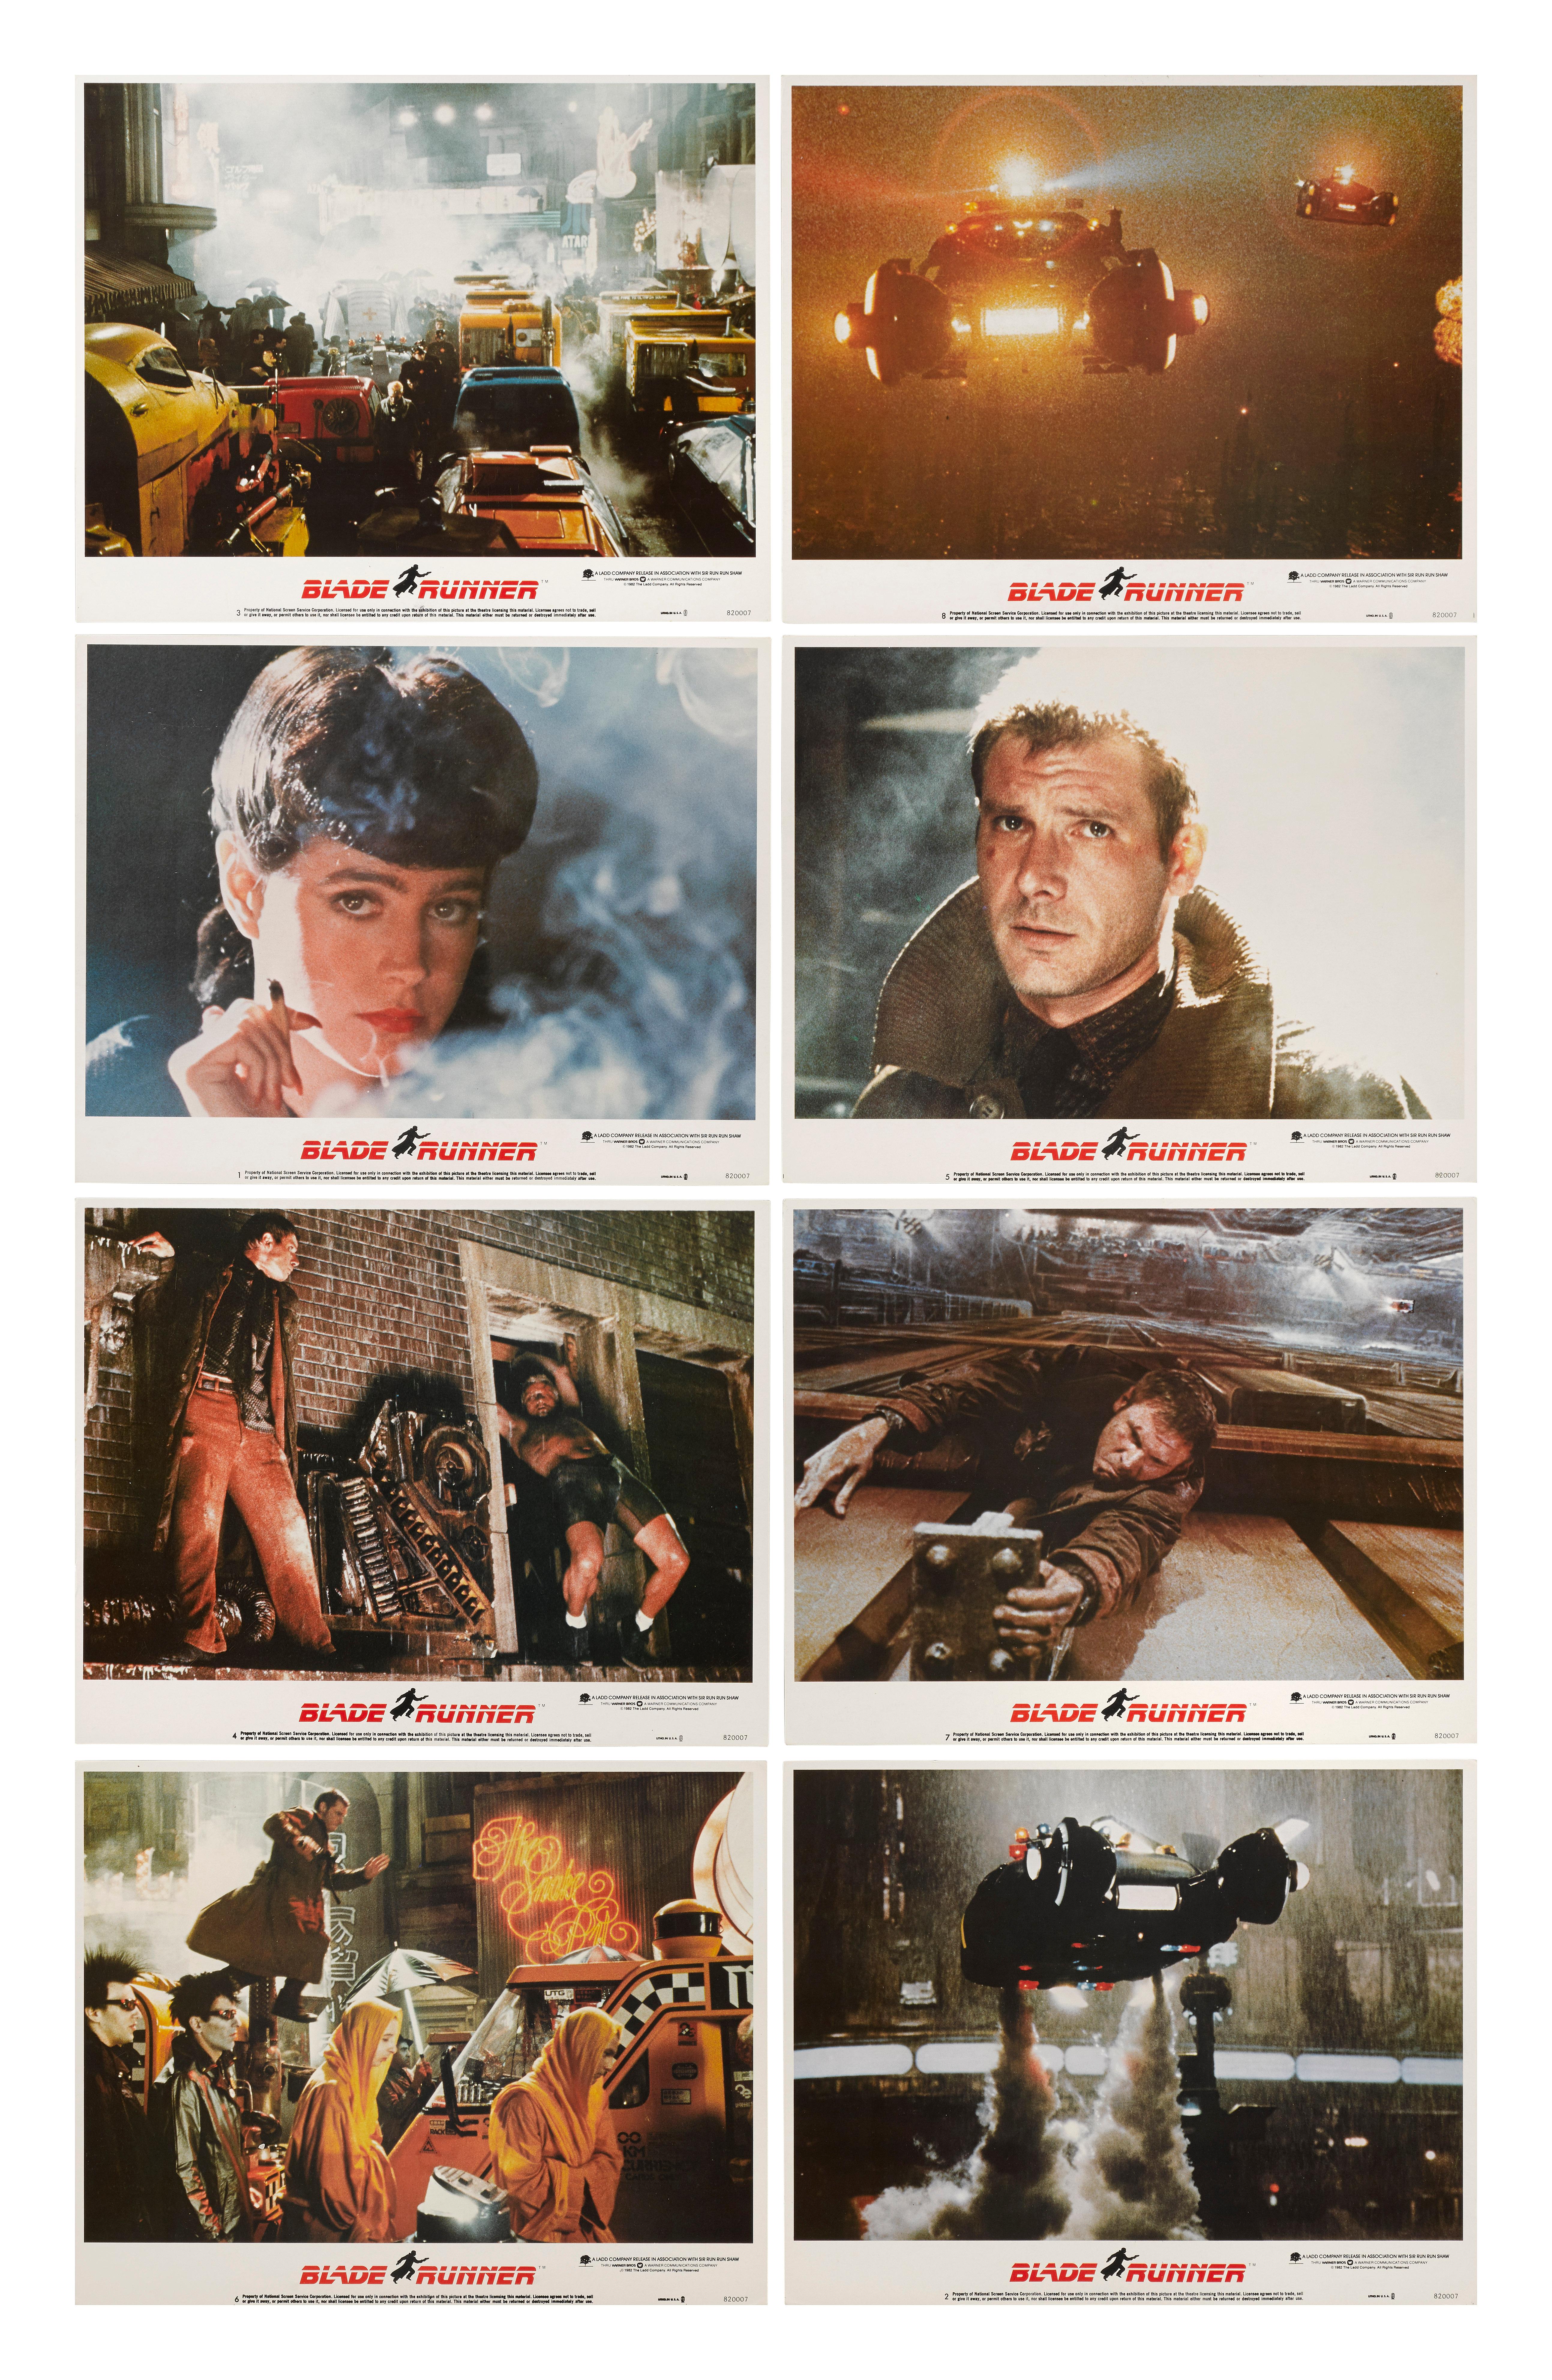 Original US set of 8 lobby card for Ridley Scott's 1980s sci-fi film has become a true cult classic. Thirty-five years on a sequel (Blade Runner 2049) was made, also starring Harrison Ford. 
This set are near mint condition and would be sent out